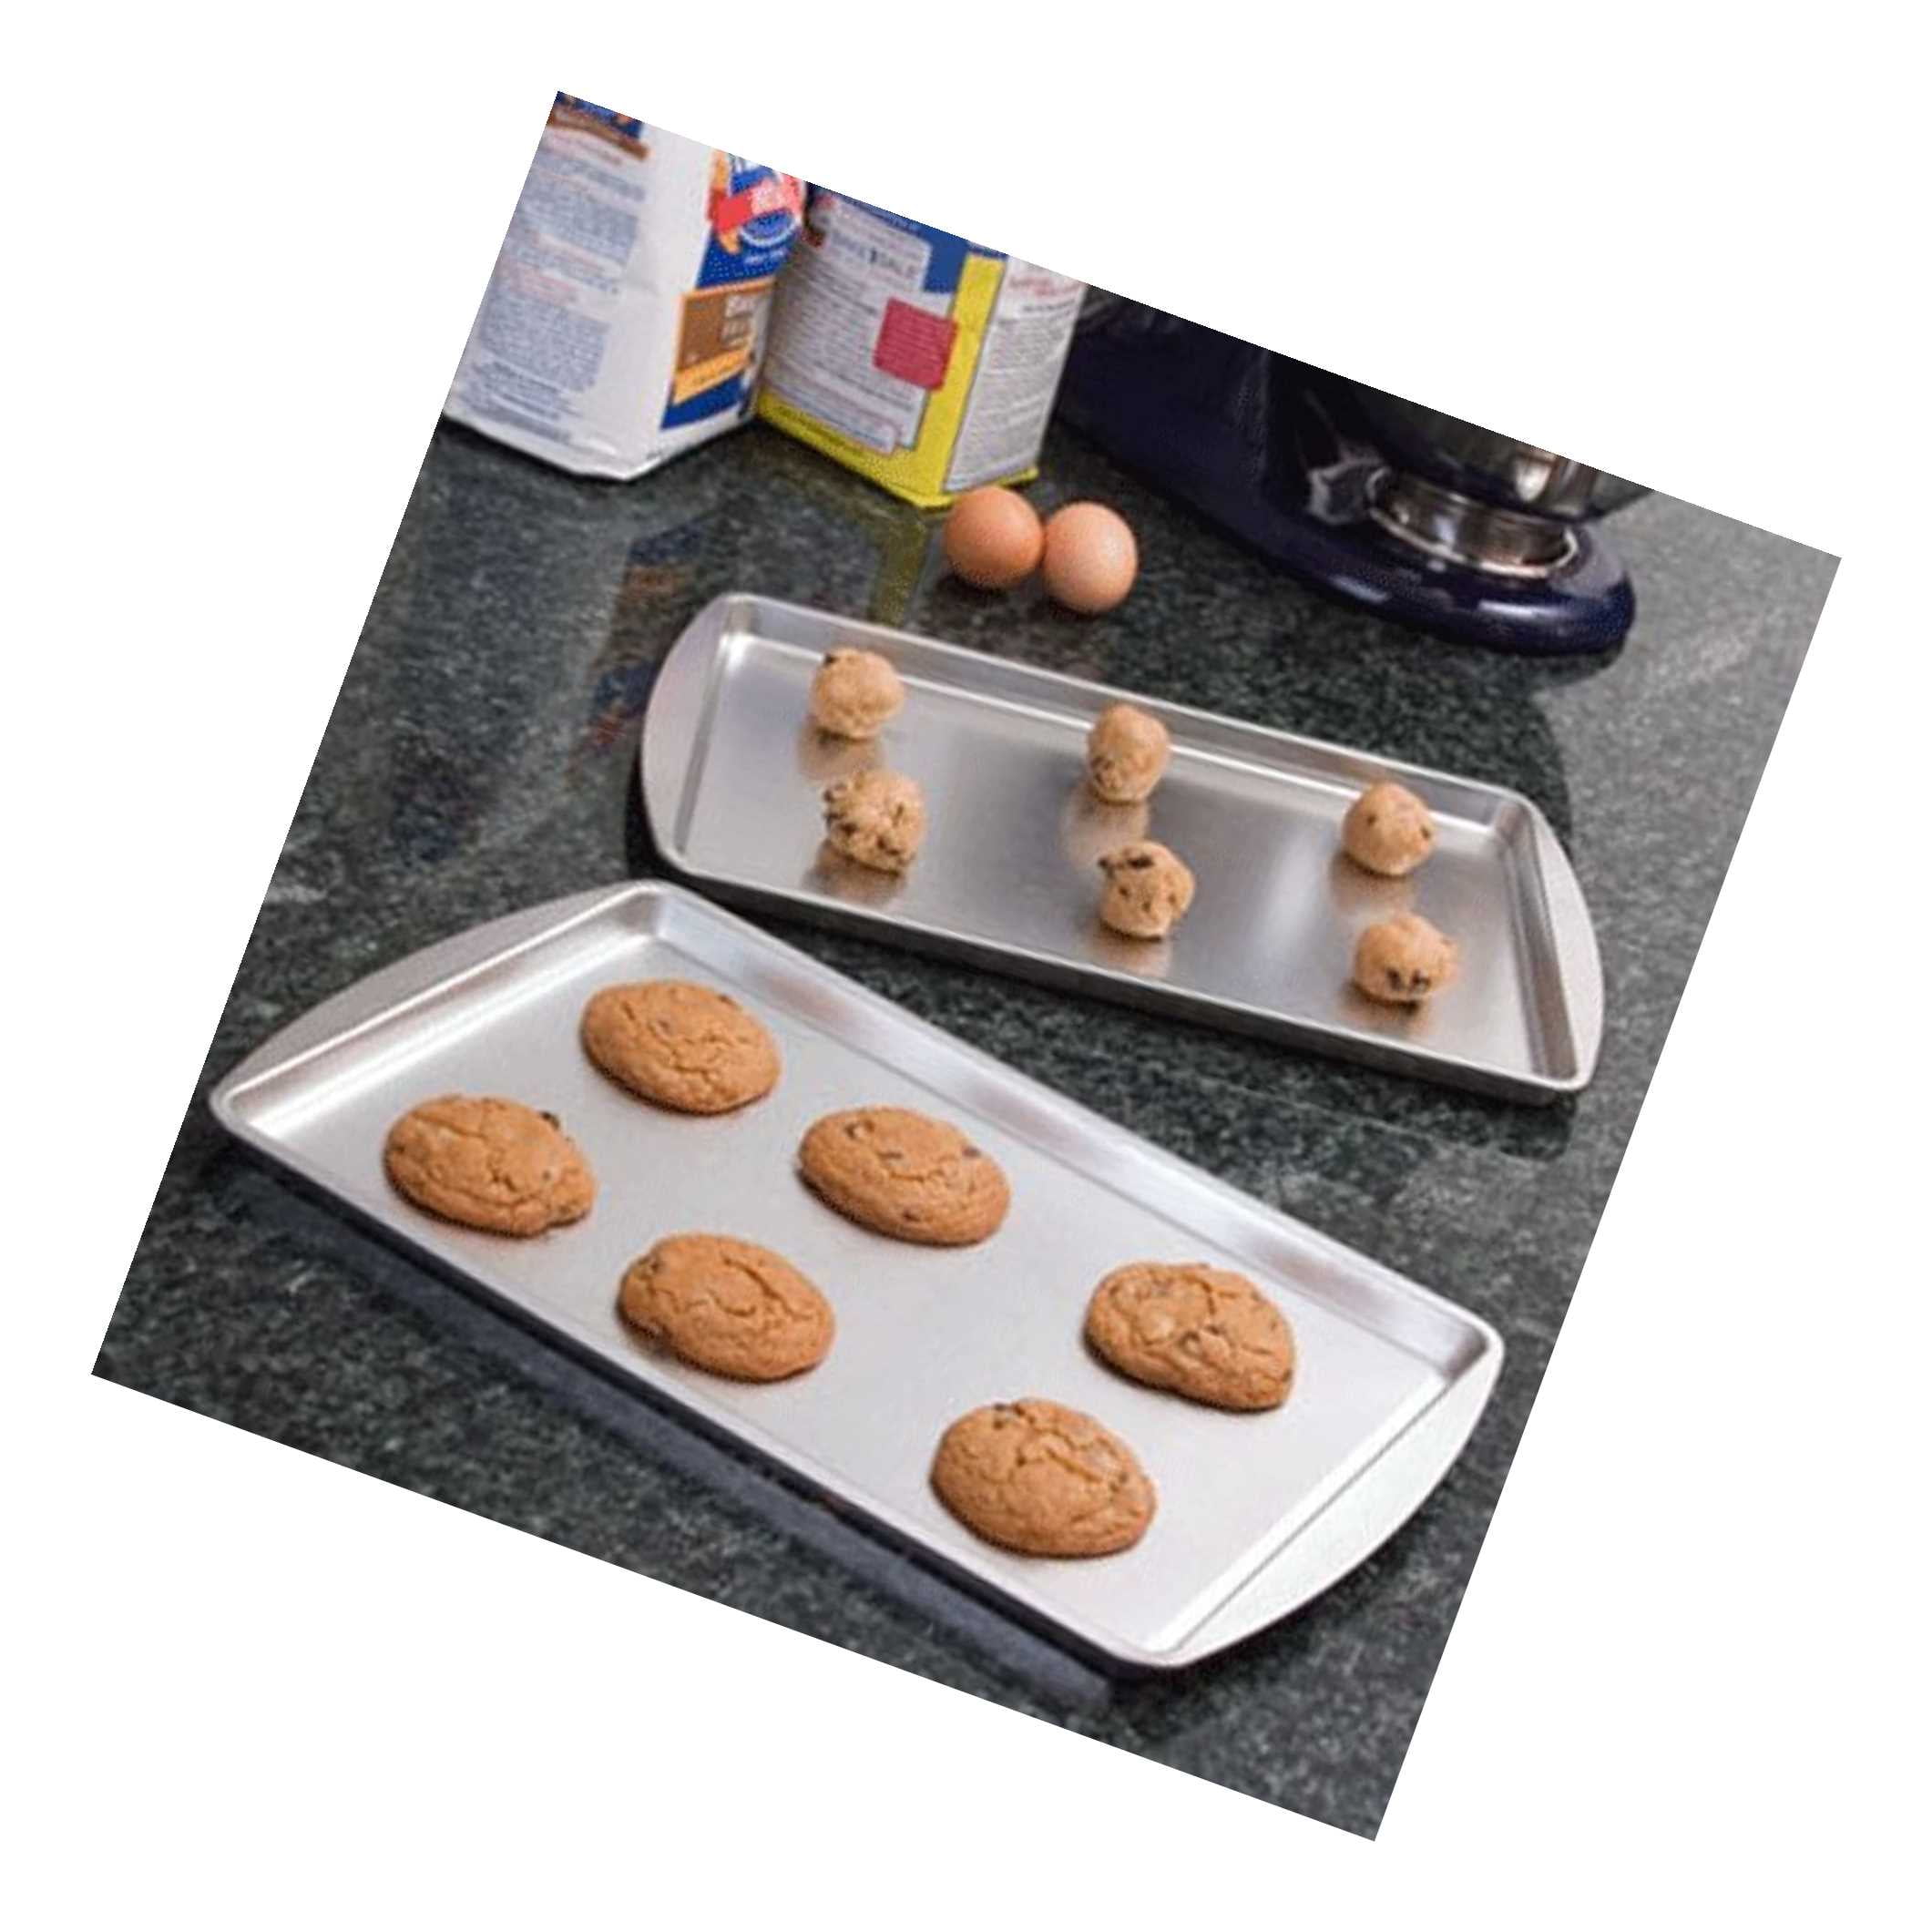 2 Coun... Cooking Concepts Steel Cookie Pans 9 x 13" Party & Catering Supplies 